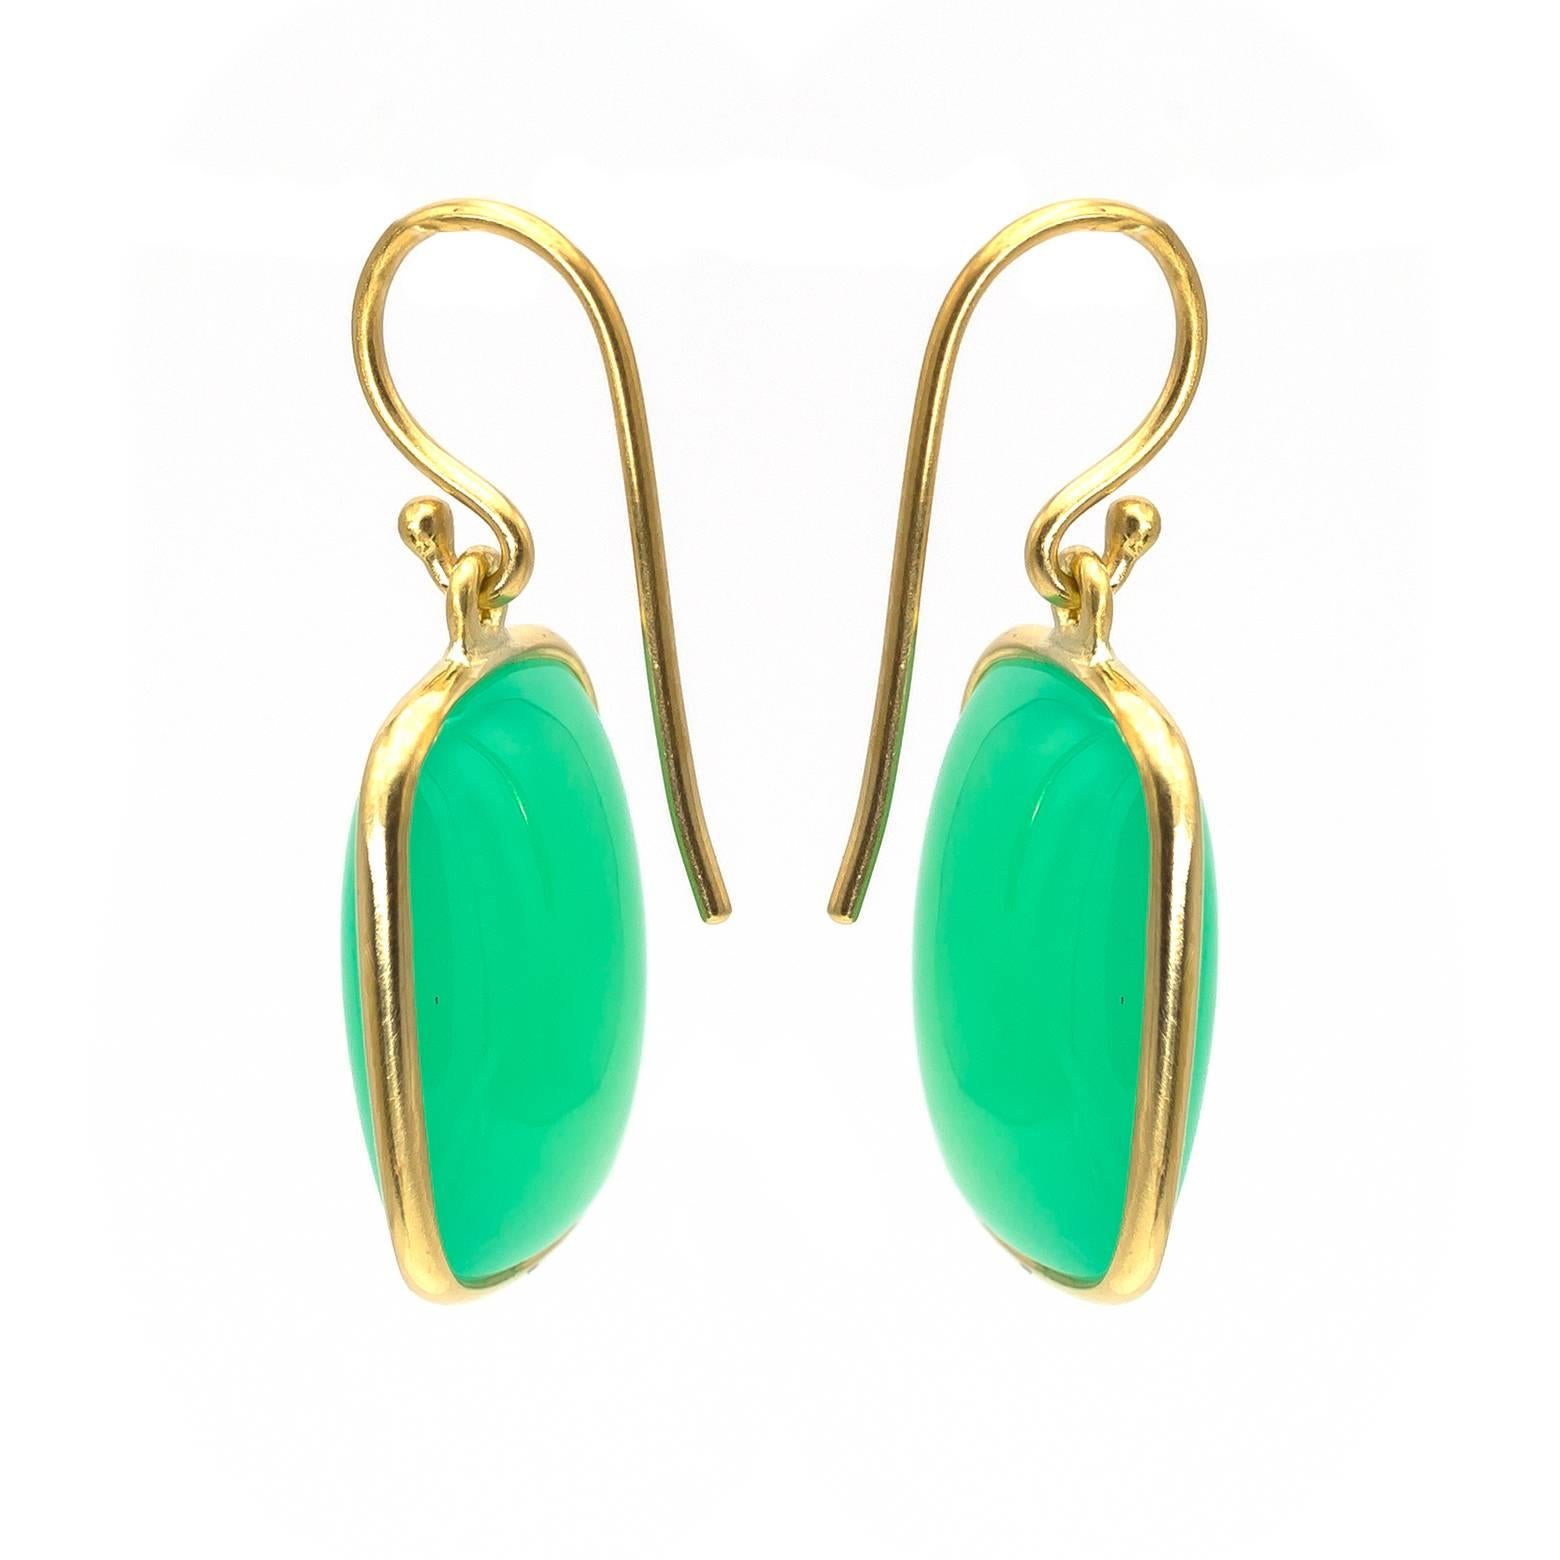 Spring green and delightful! These gorgeous green and gold earrings pop with color and lighten up everything around them. A great spring time color that can jazz up any outfit! 18K yellow gold.